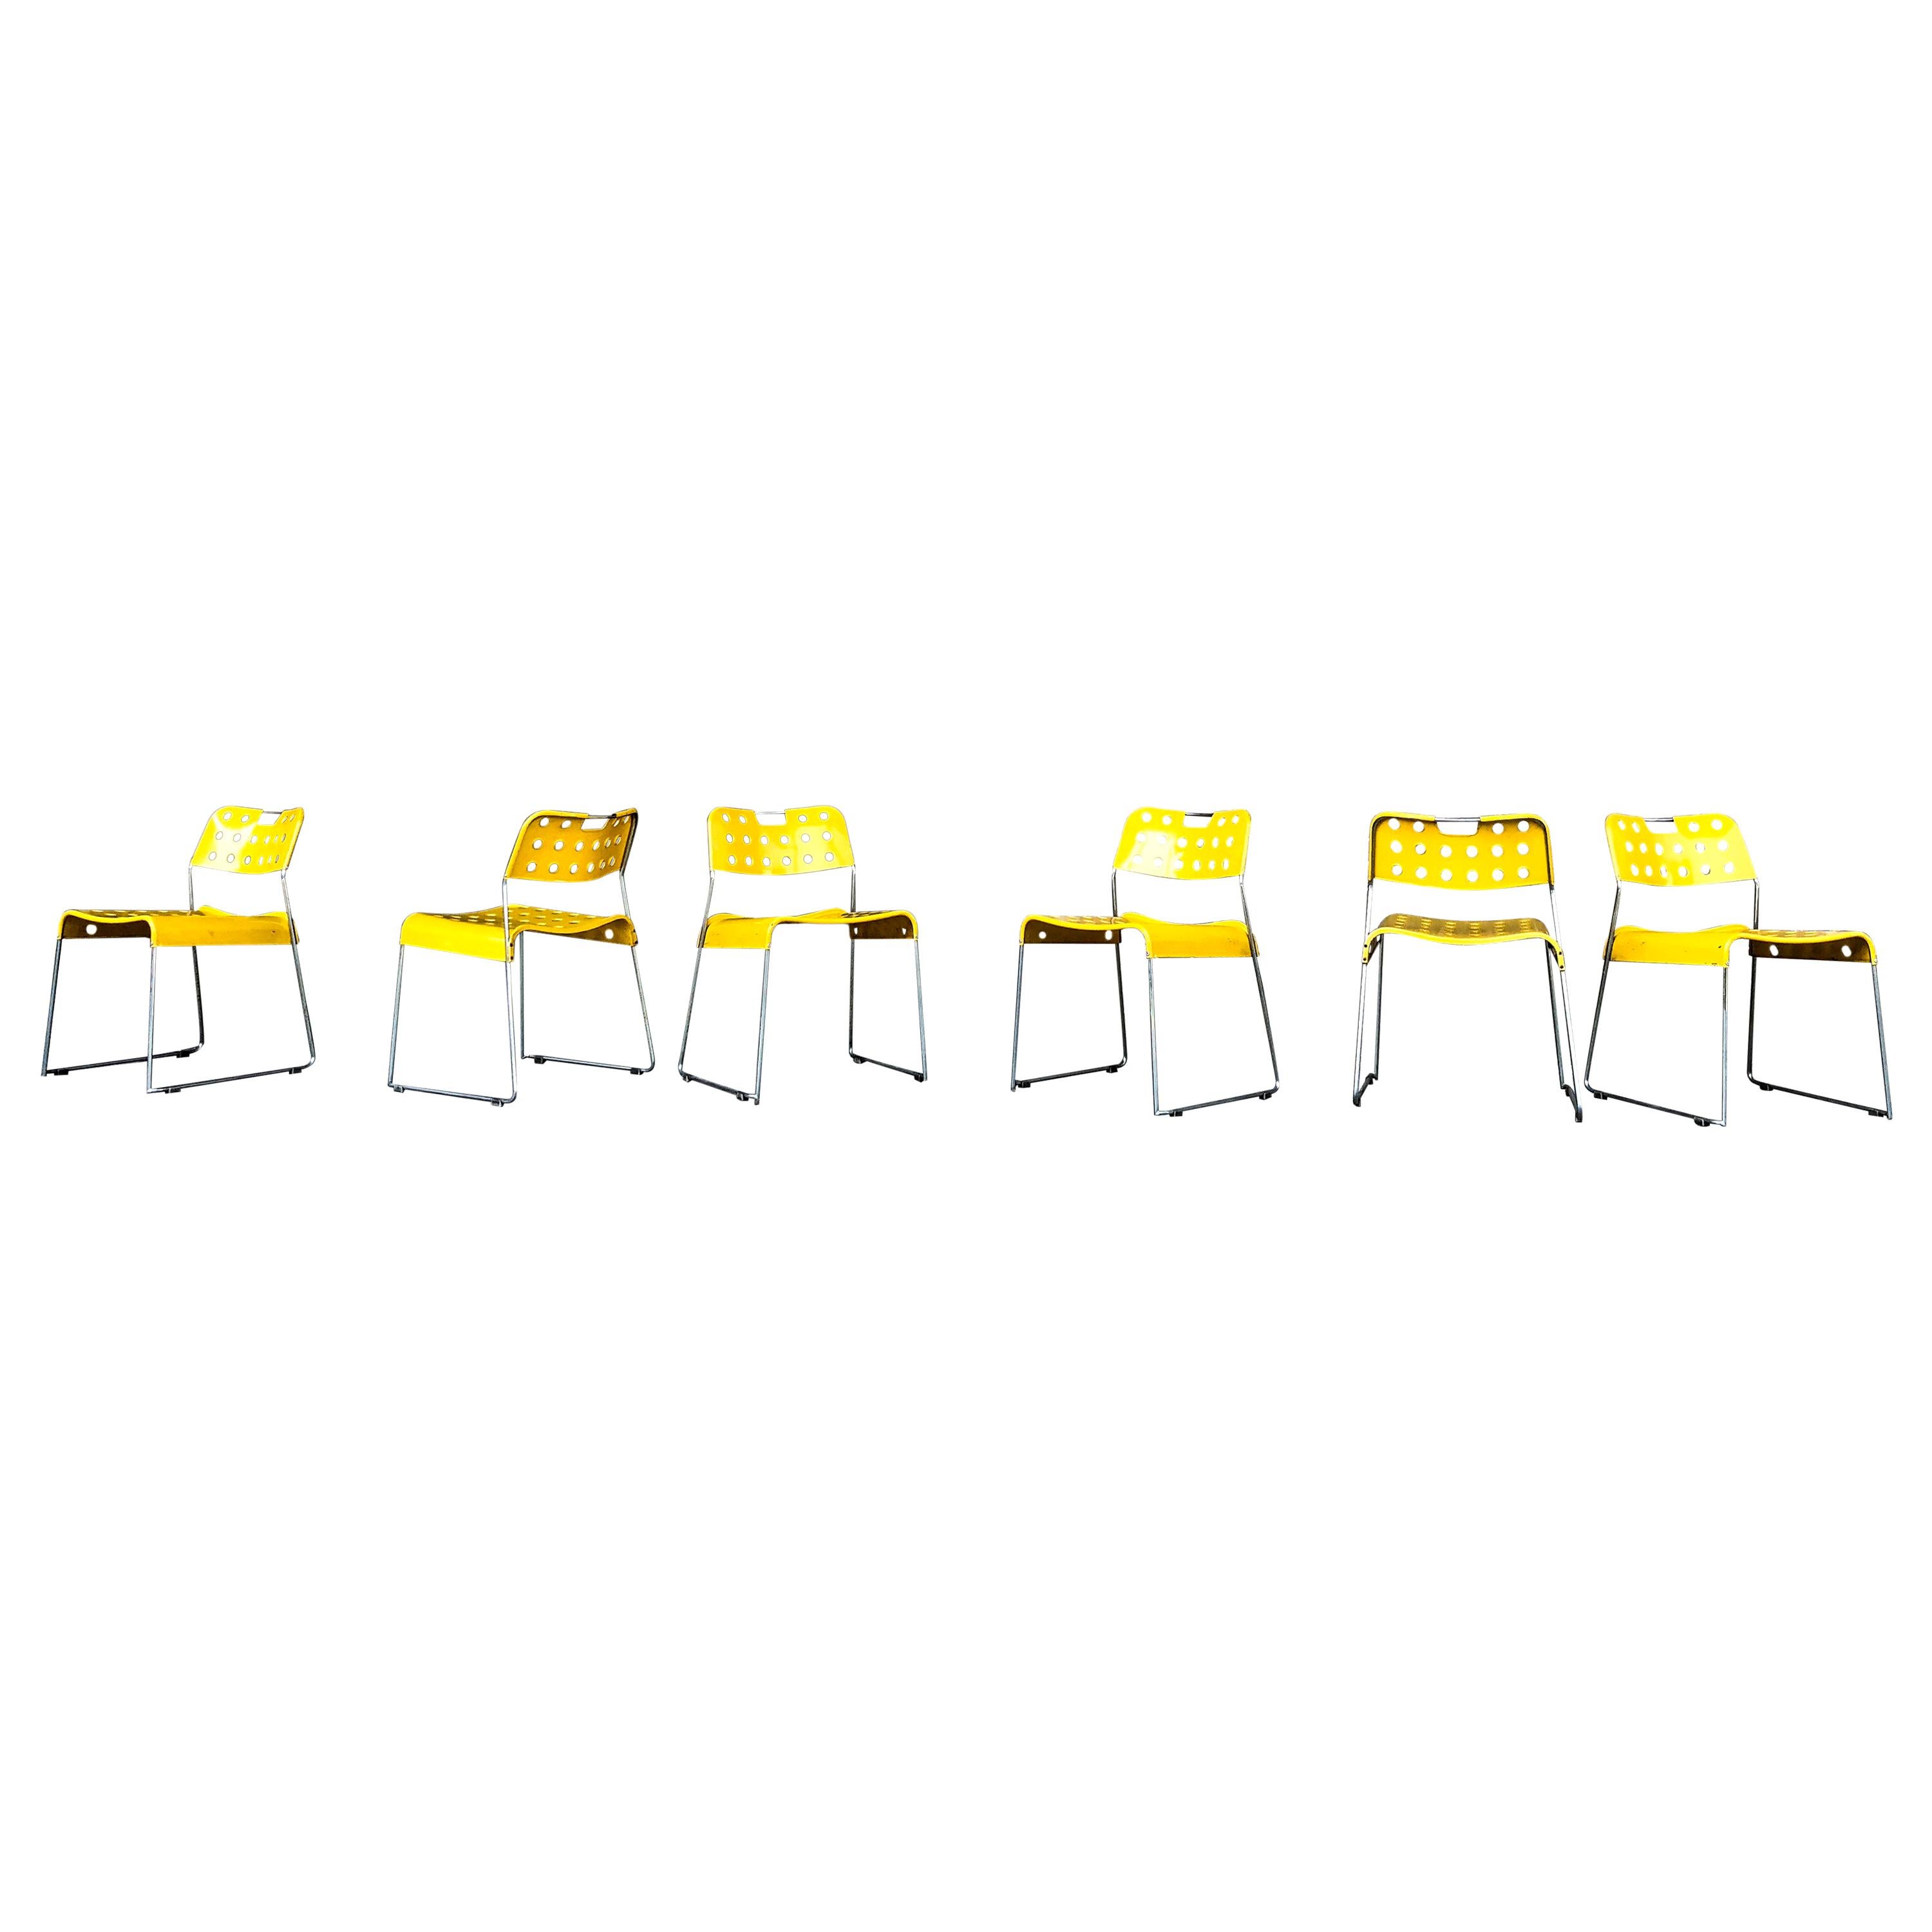 Rodney Kinsman Space Age Yellow Omstak Chair for Bieffeplast, 1971, Set of 6 For Sale